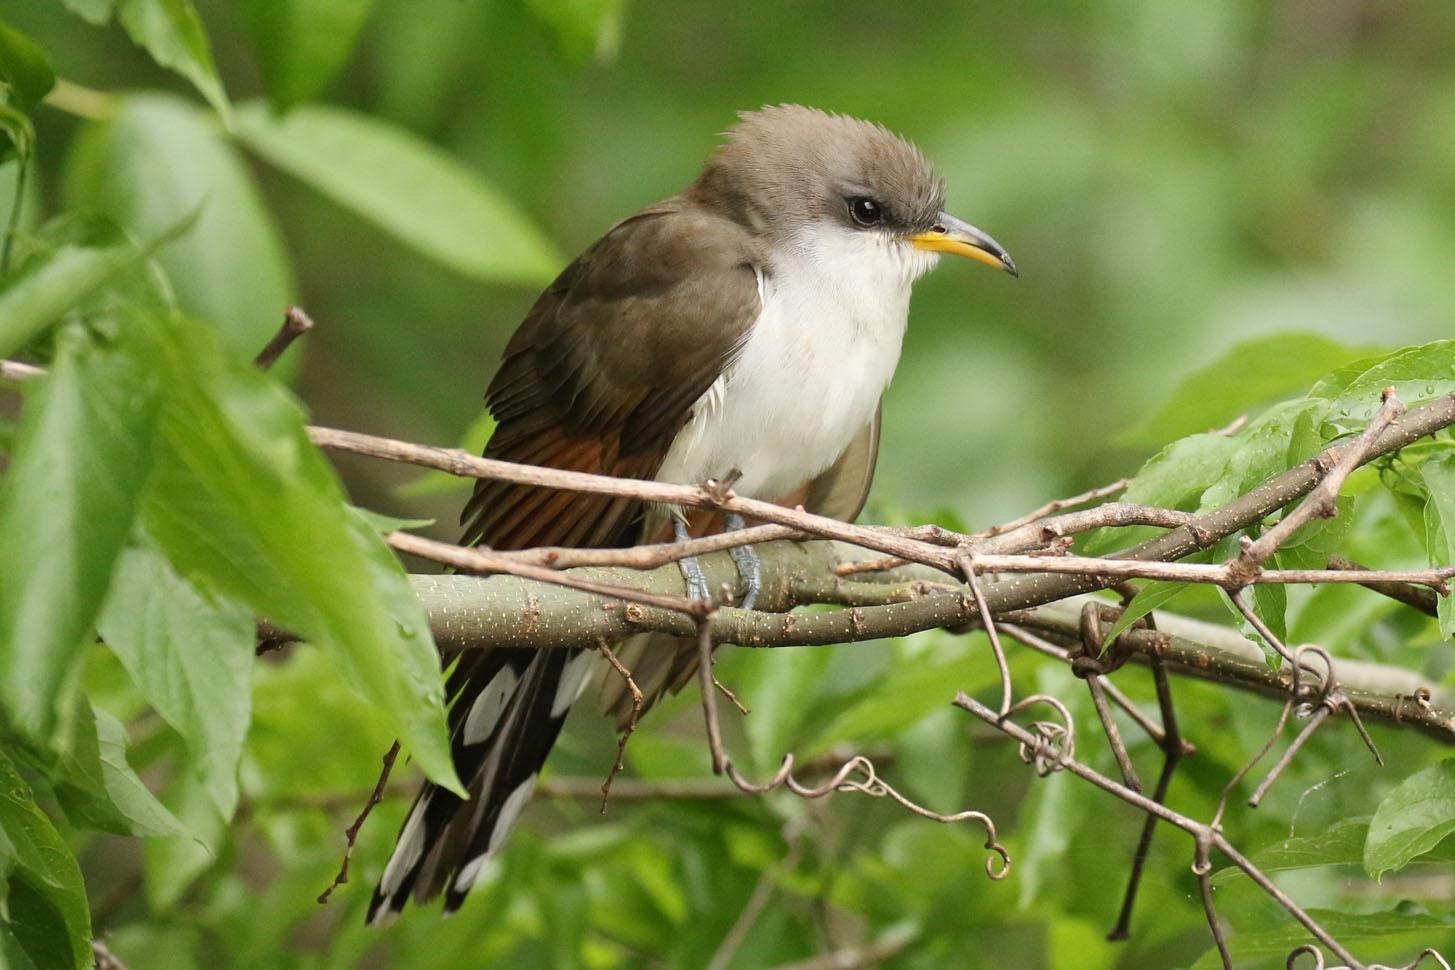 Yellow-billed Cuckoo Photo by Kristy Baker